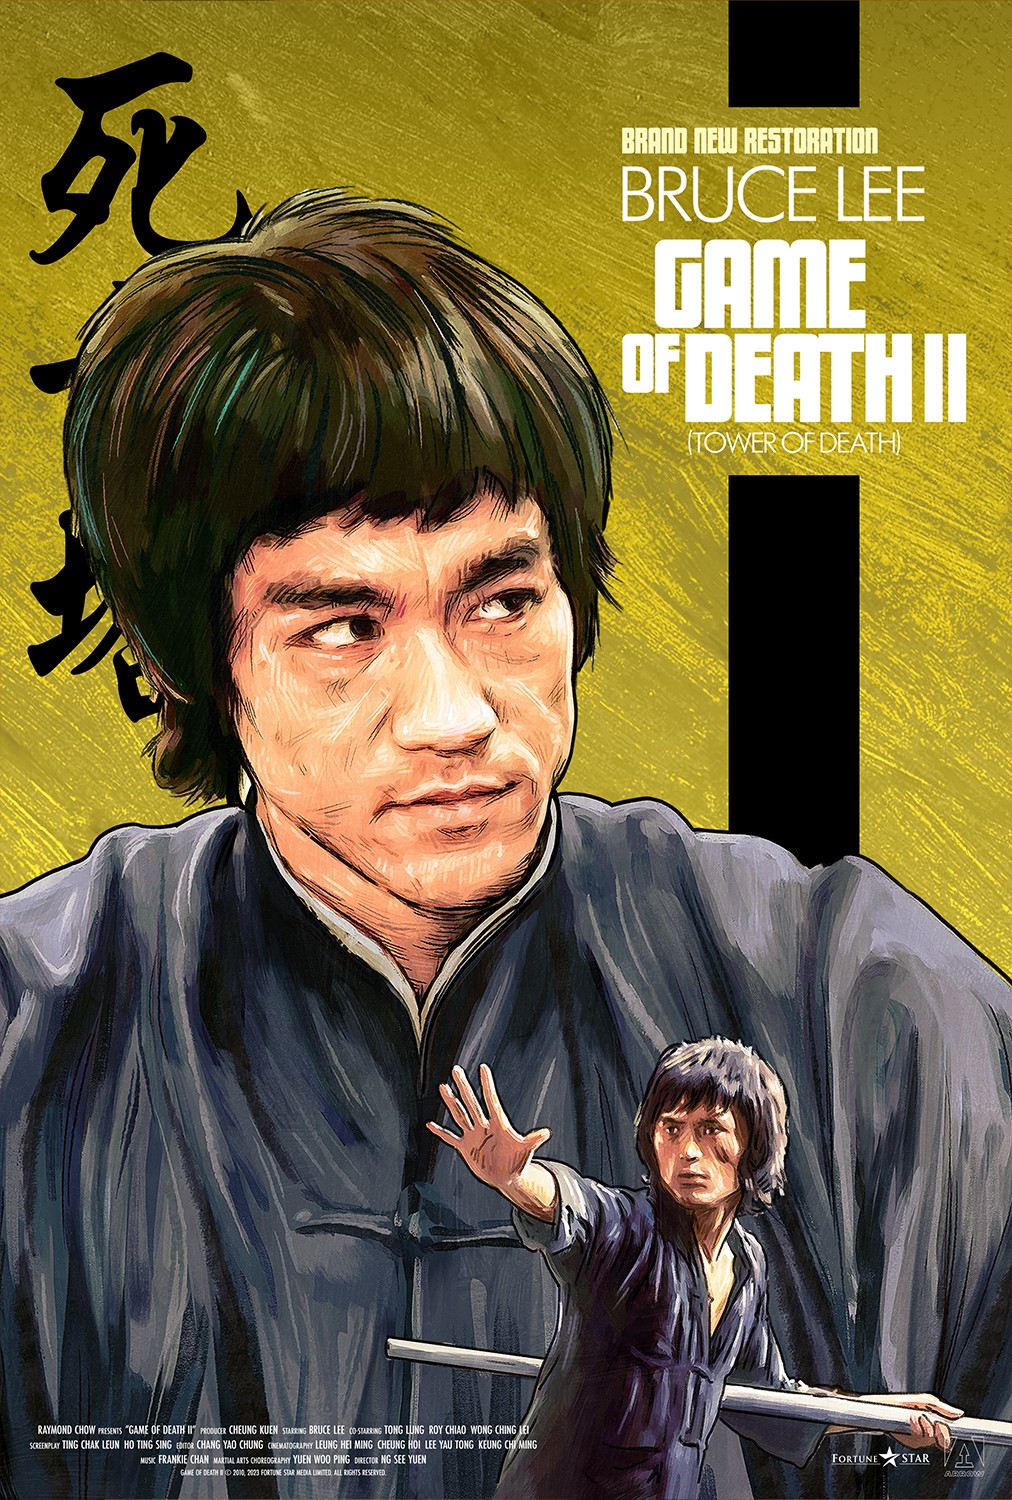 GAME OF DEATH II